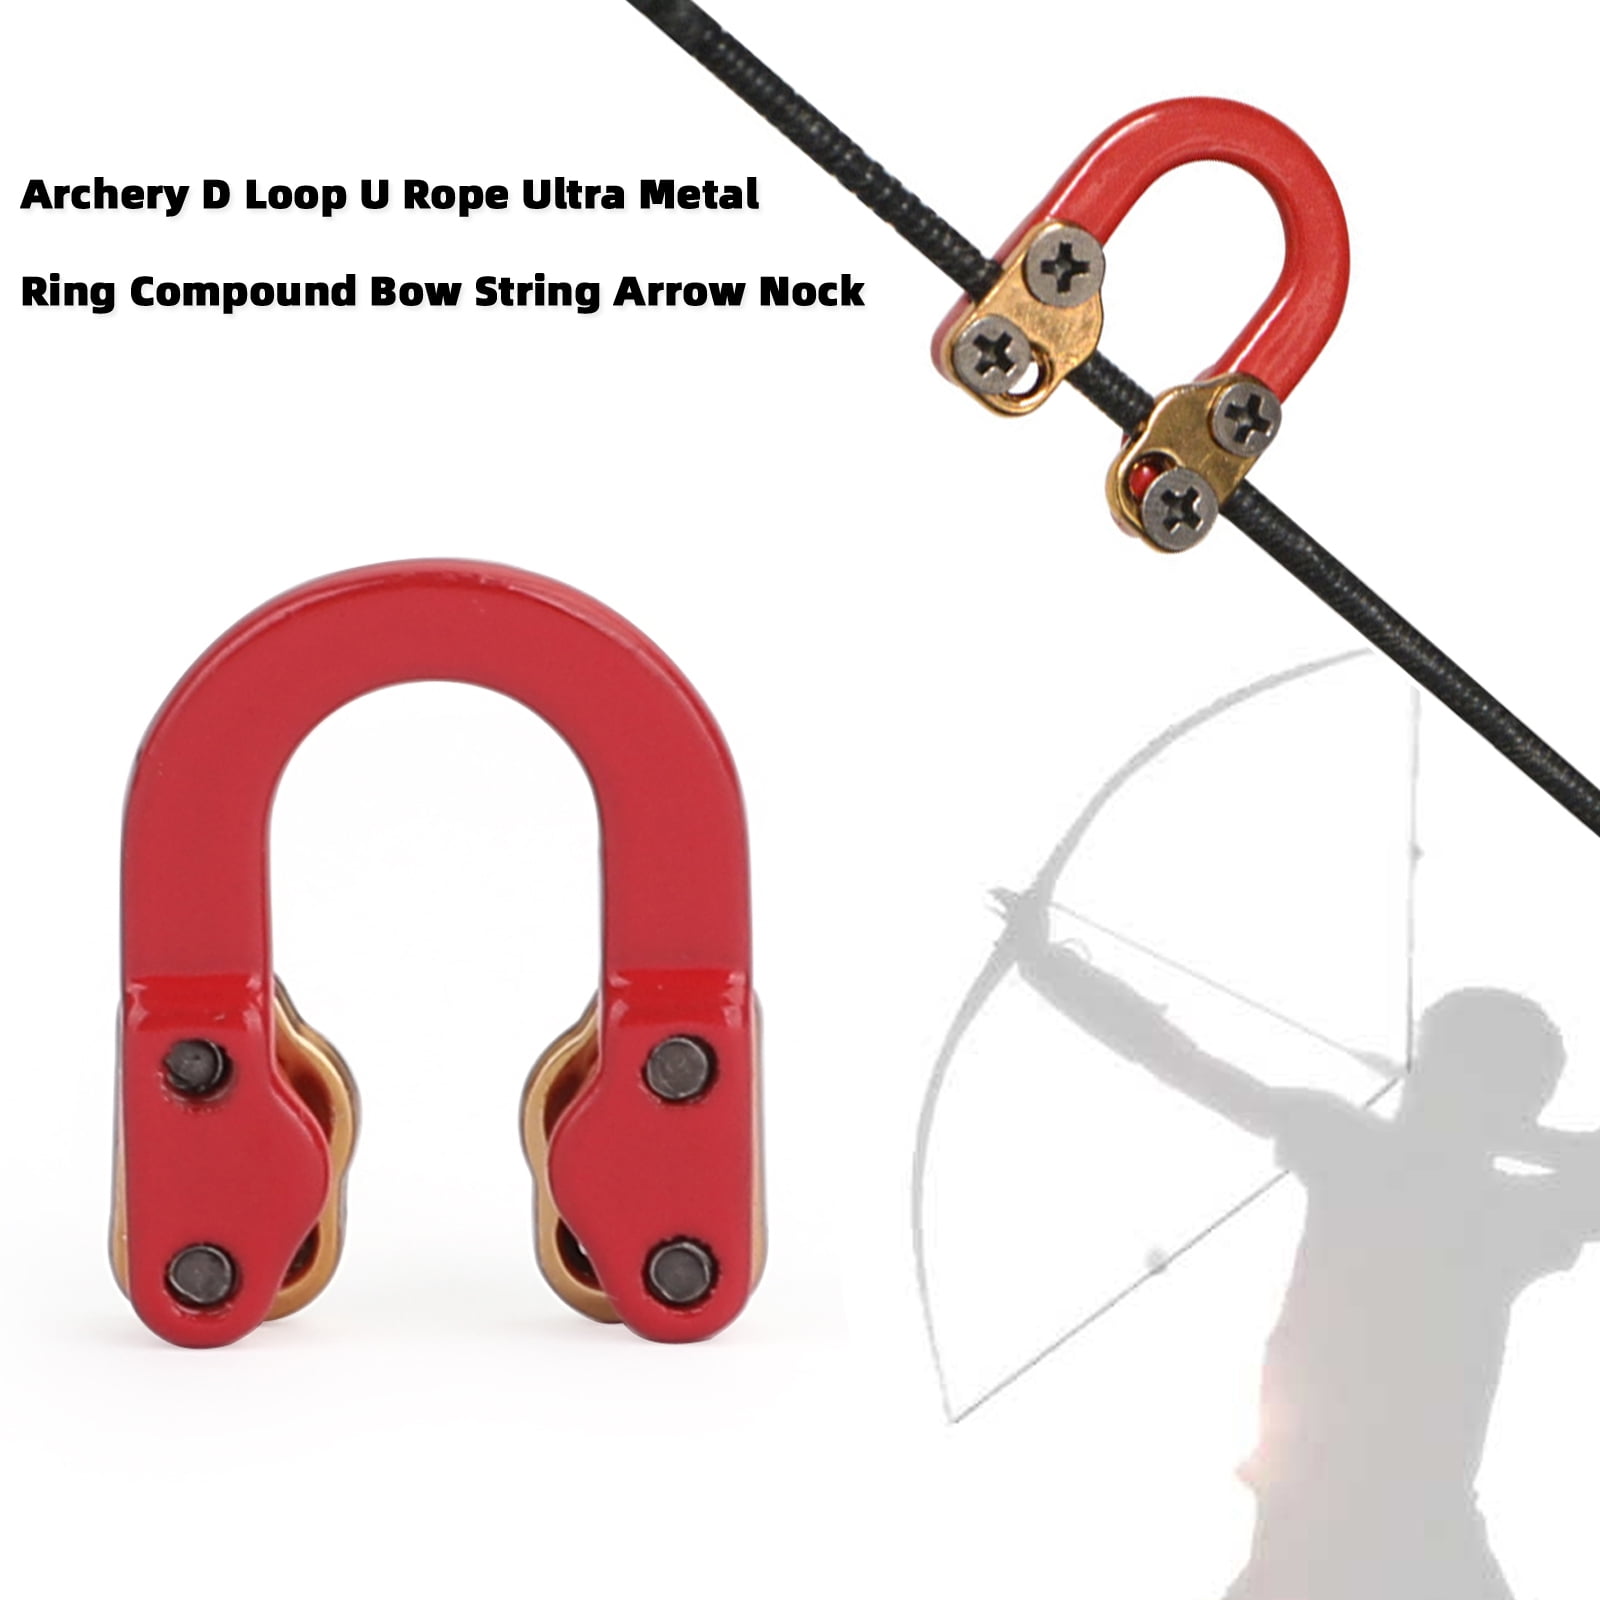 Details about   Archery D Loop Ultra Metal Ring Compound Bow String Arrow Nock U Rope Loop RO CA 